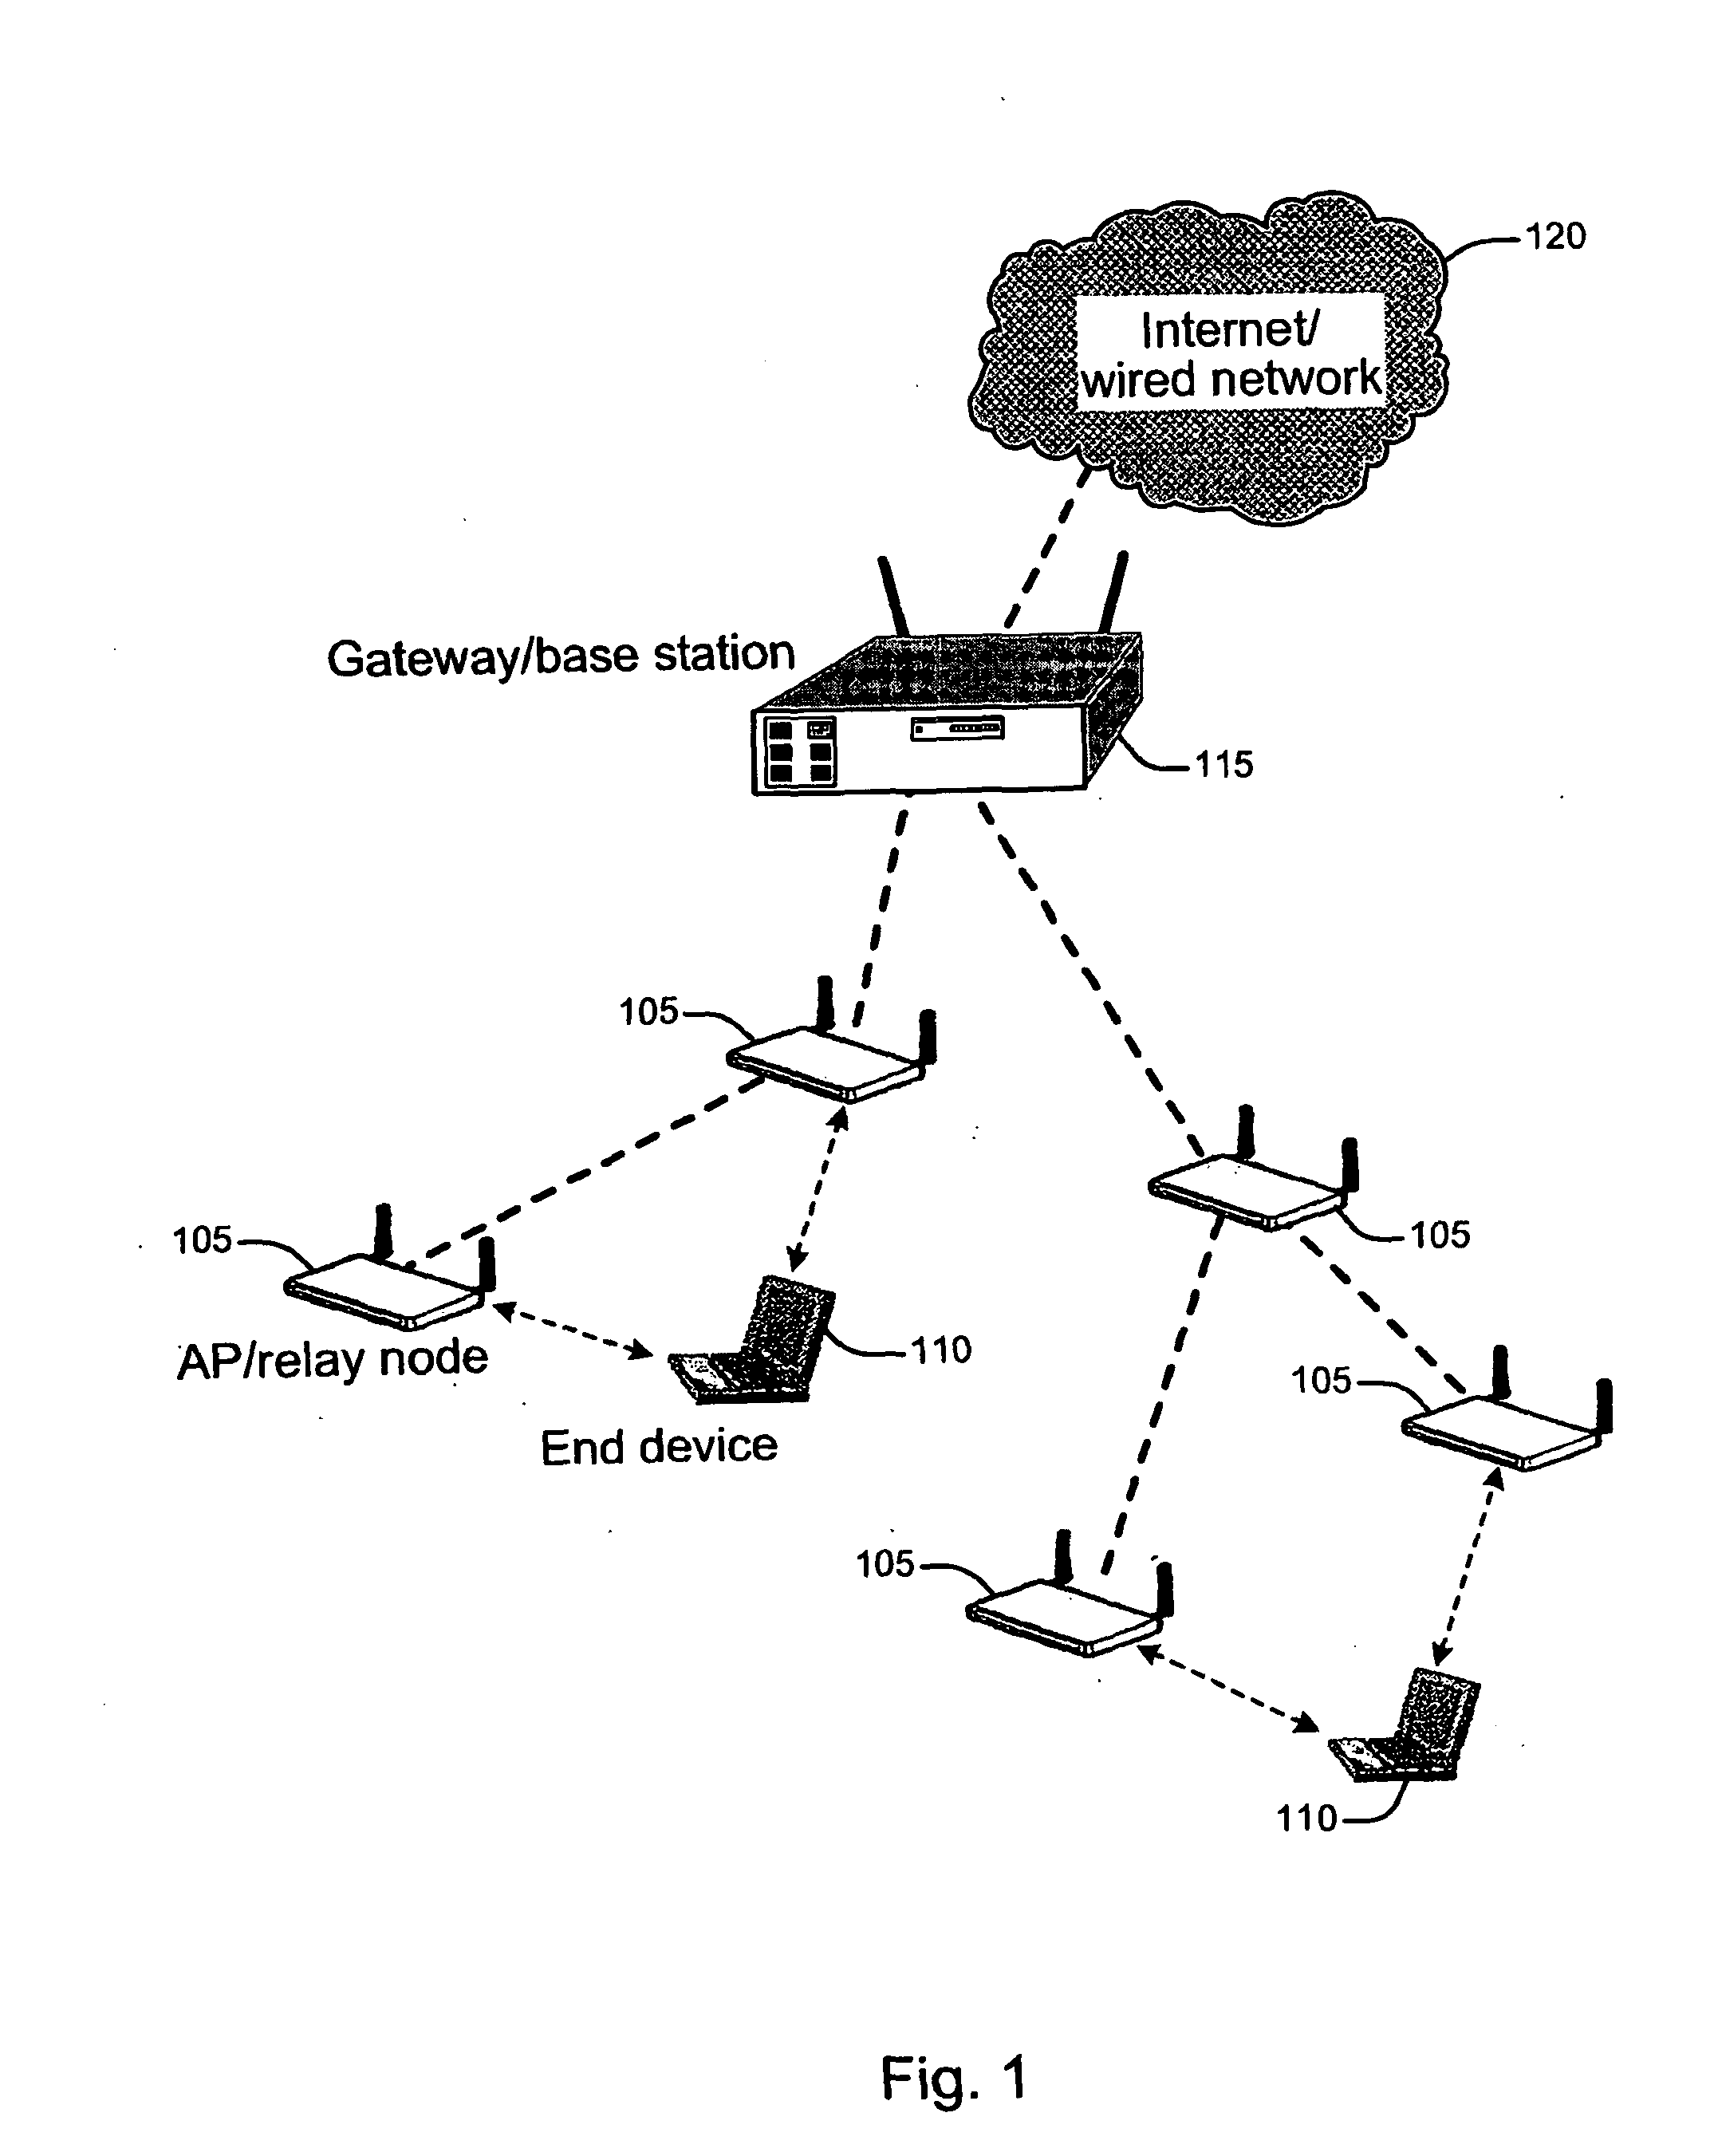 Method to select access point and relay node in multi-hop wireless networking